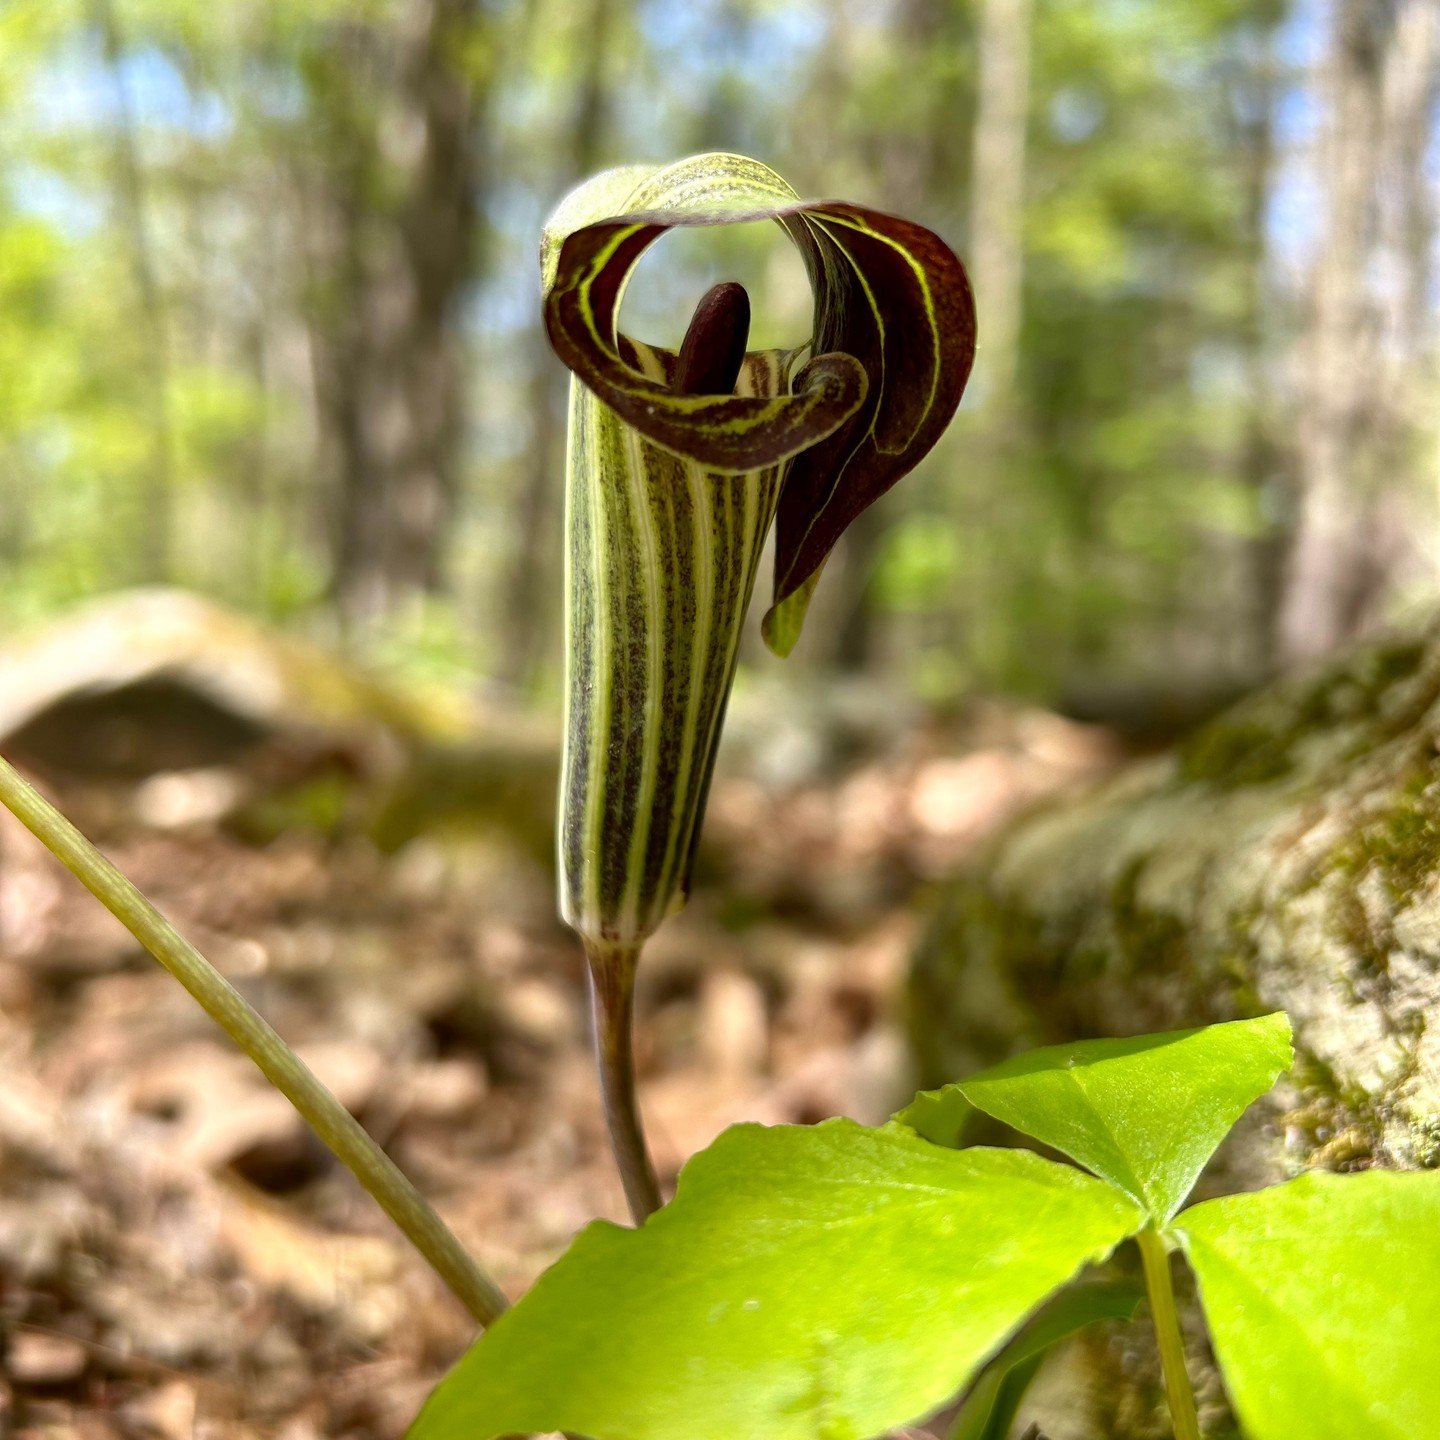 Spring wildflowers continue to bloom! Jack-in-the-Pulpit (photo one) and starflower (photo two) can both be found in shaded deciduous forests in Maine. Keep your eye peeled though; Jack-in-the-pulpit is especially good at staying camouflaged along th